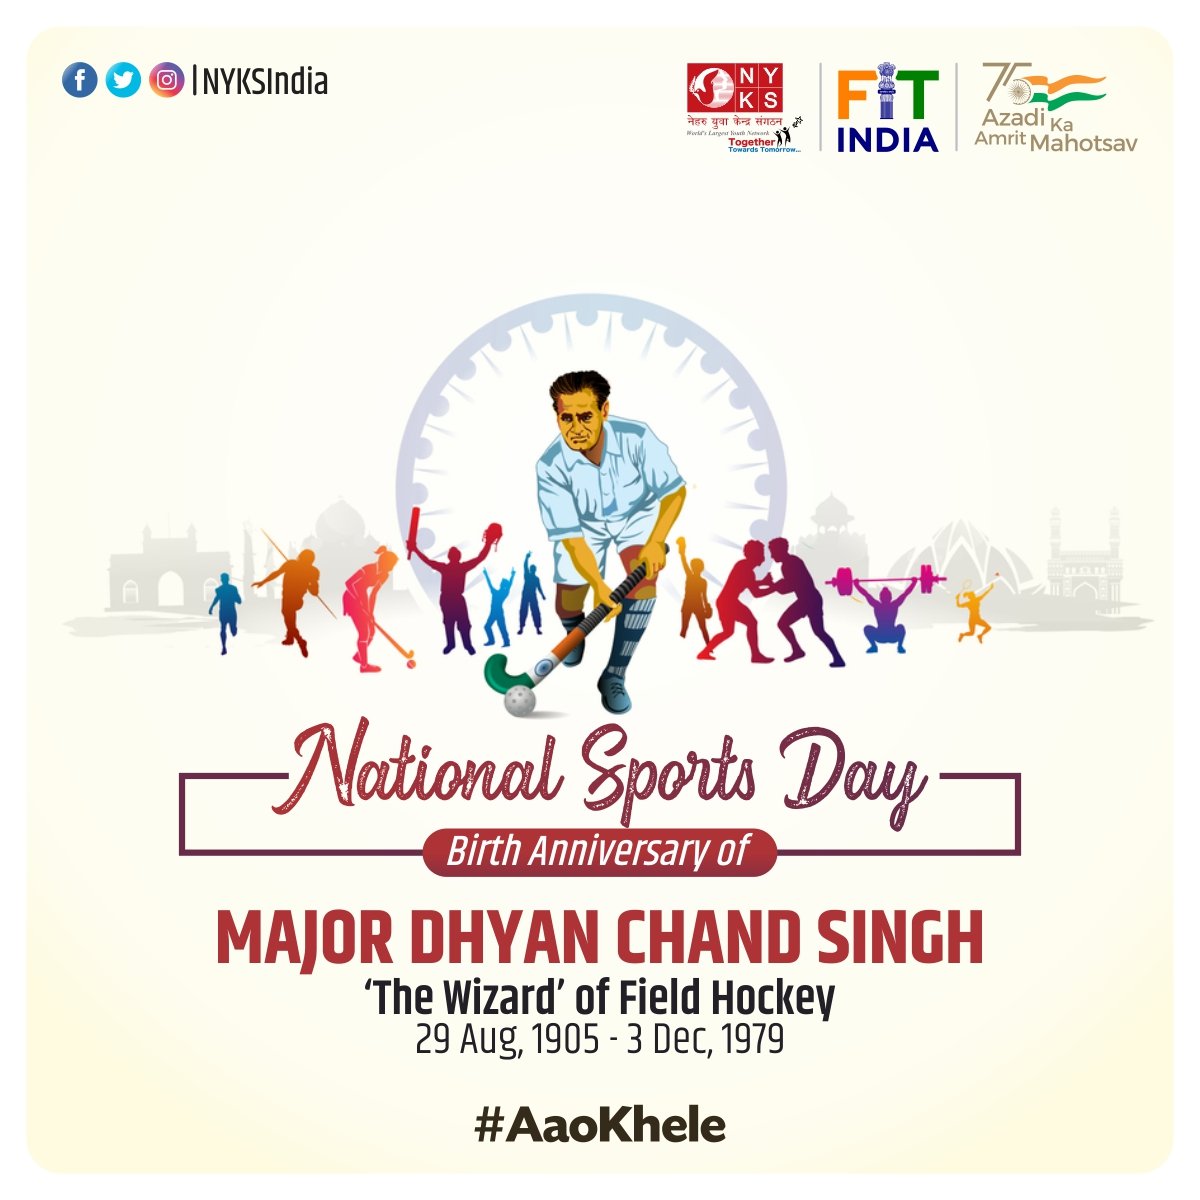 Hard days are the best because those are the days when champions are made. Happy National Sports Day! #NationalSportsDay2022 #AaoKhele #Sports4Unity #MajorDhyanChand #Sports #India #Hockey